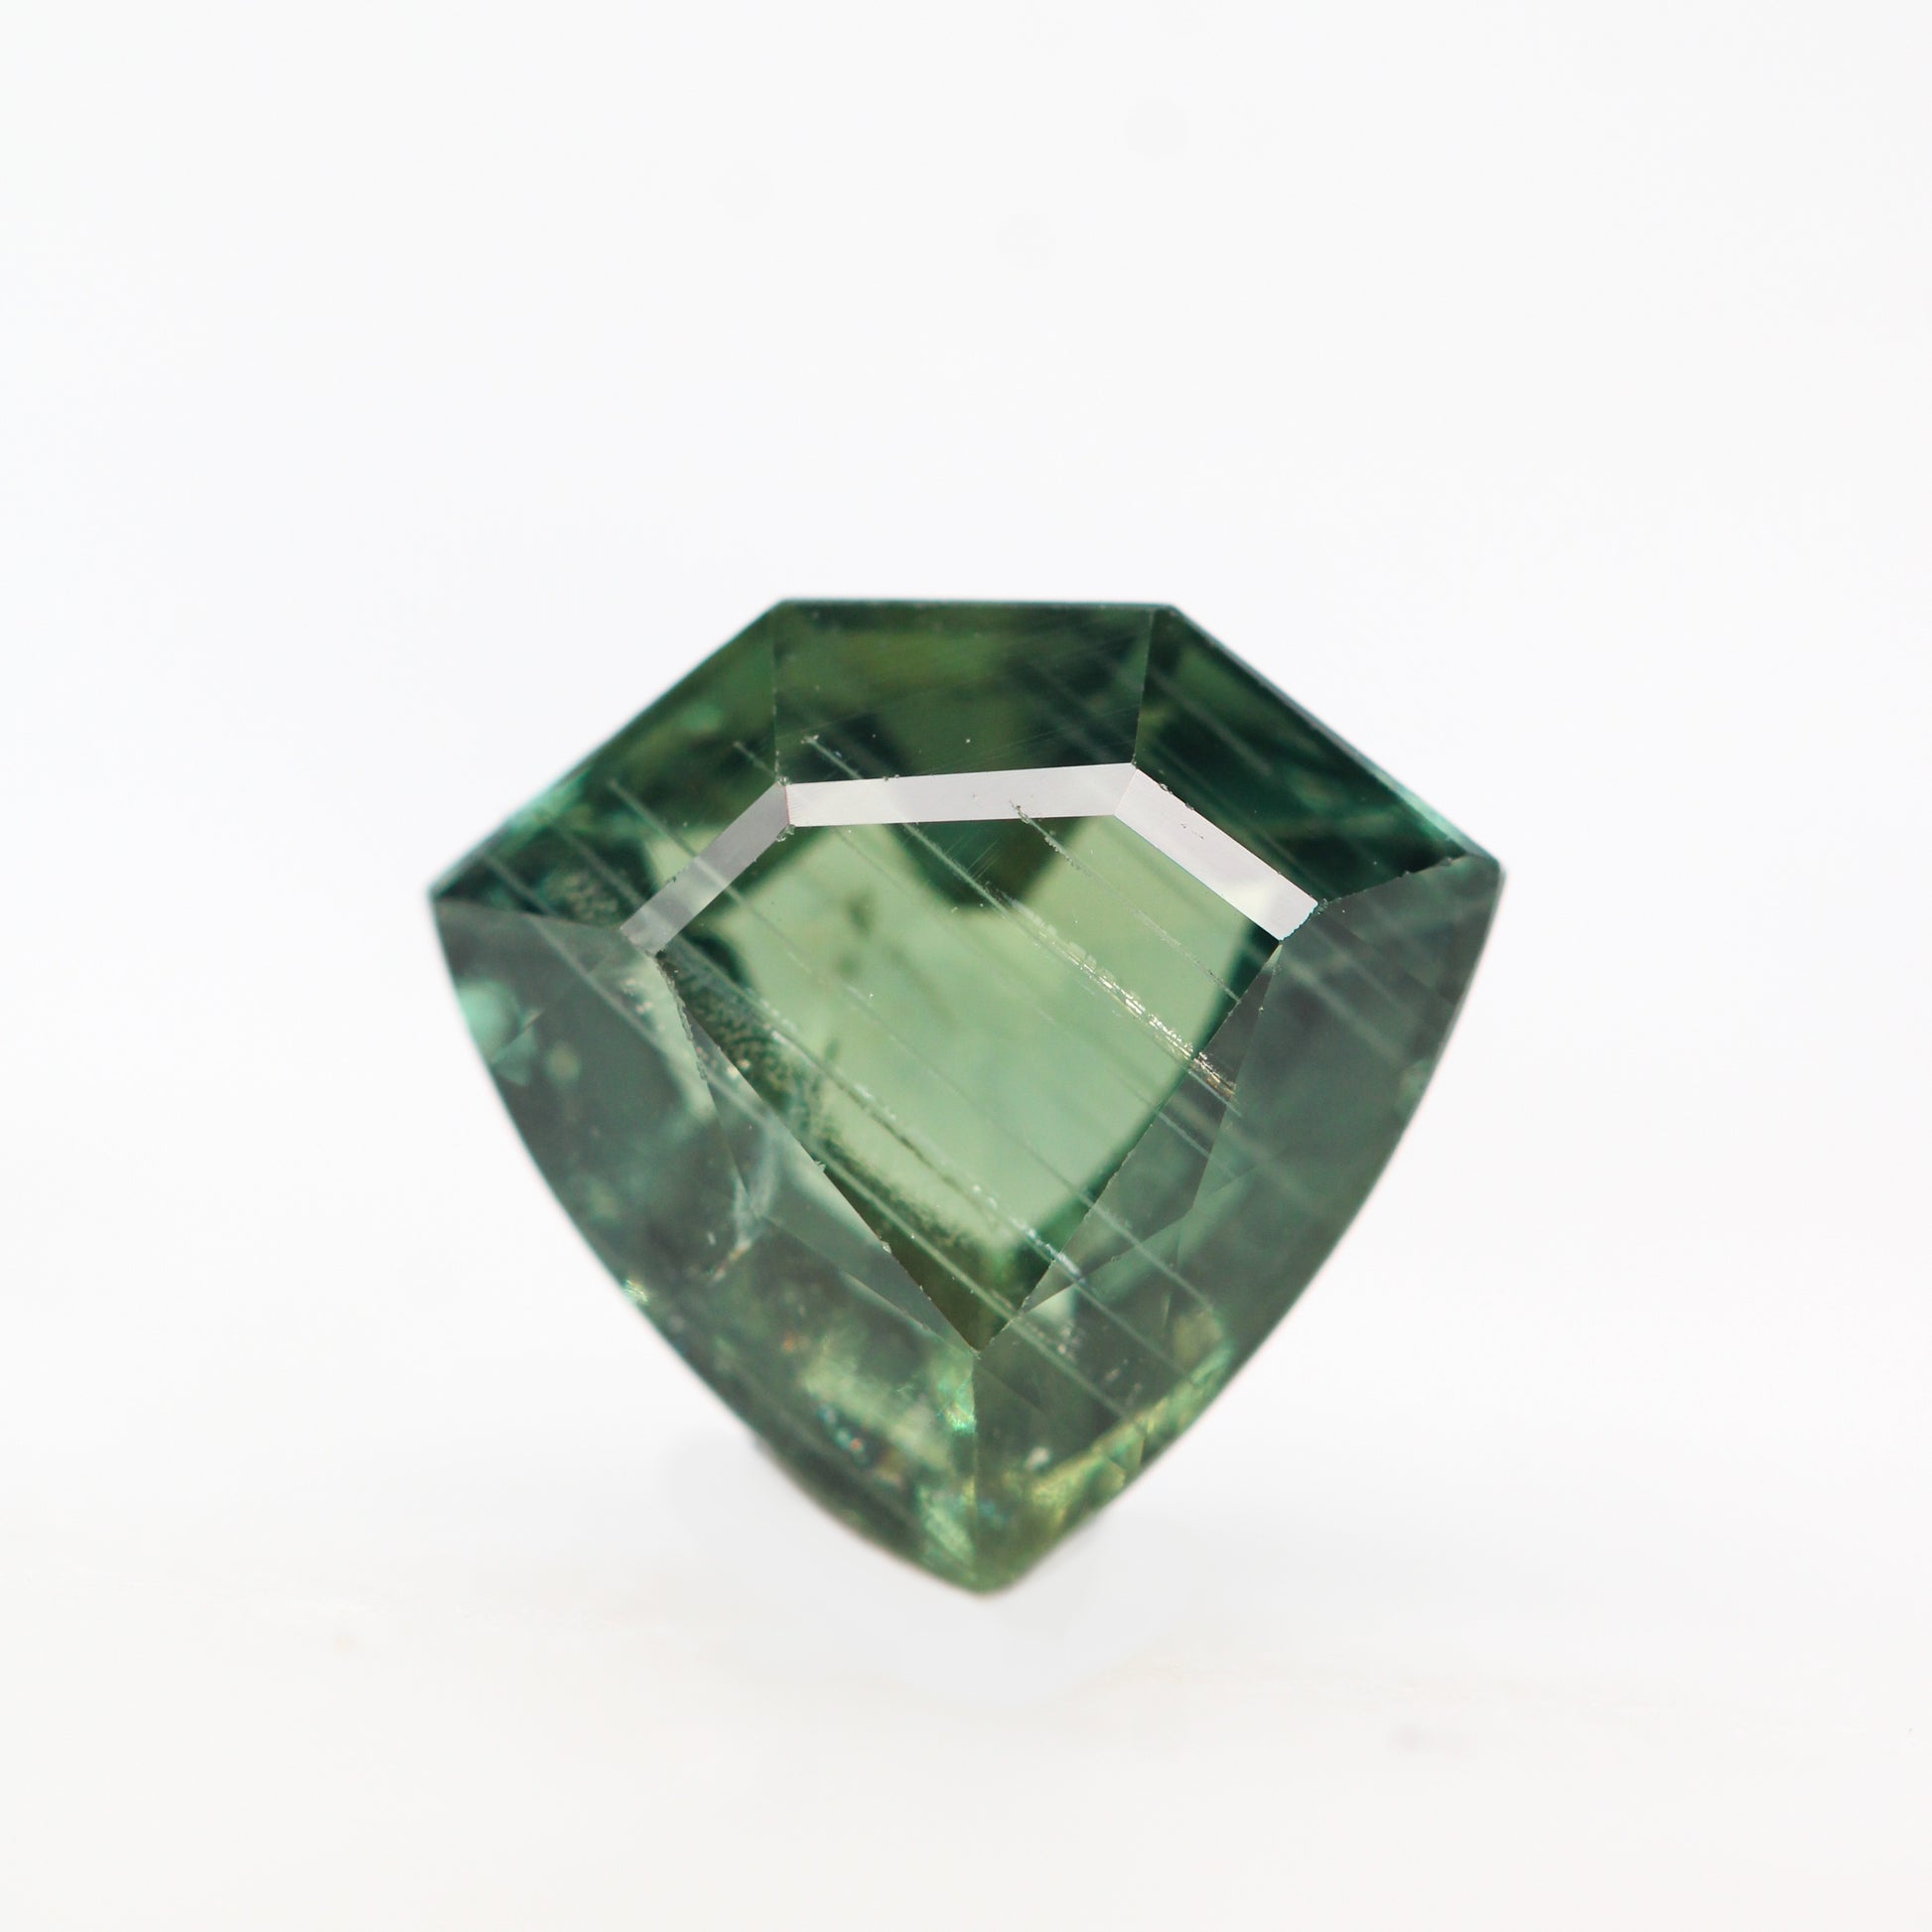 4.02 Carat Green Shield Cut Sapphire for Custom Work - Inventory Code GSS402 - Midwinter Co. Alternative Bridal Rings and Modern Fine Jewelry